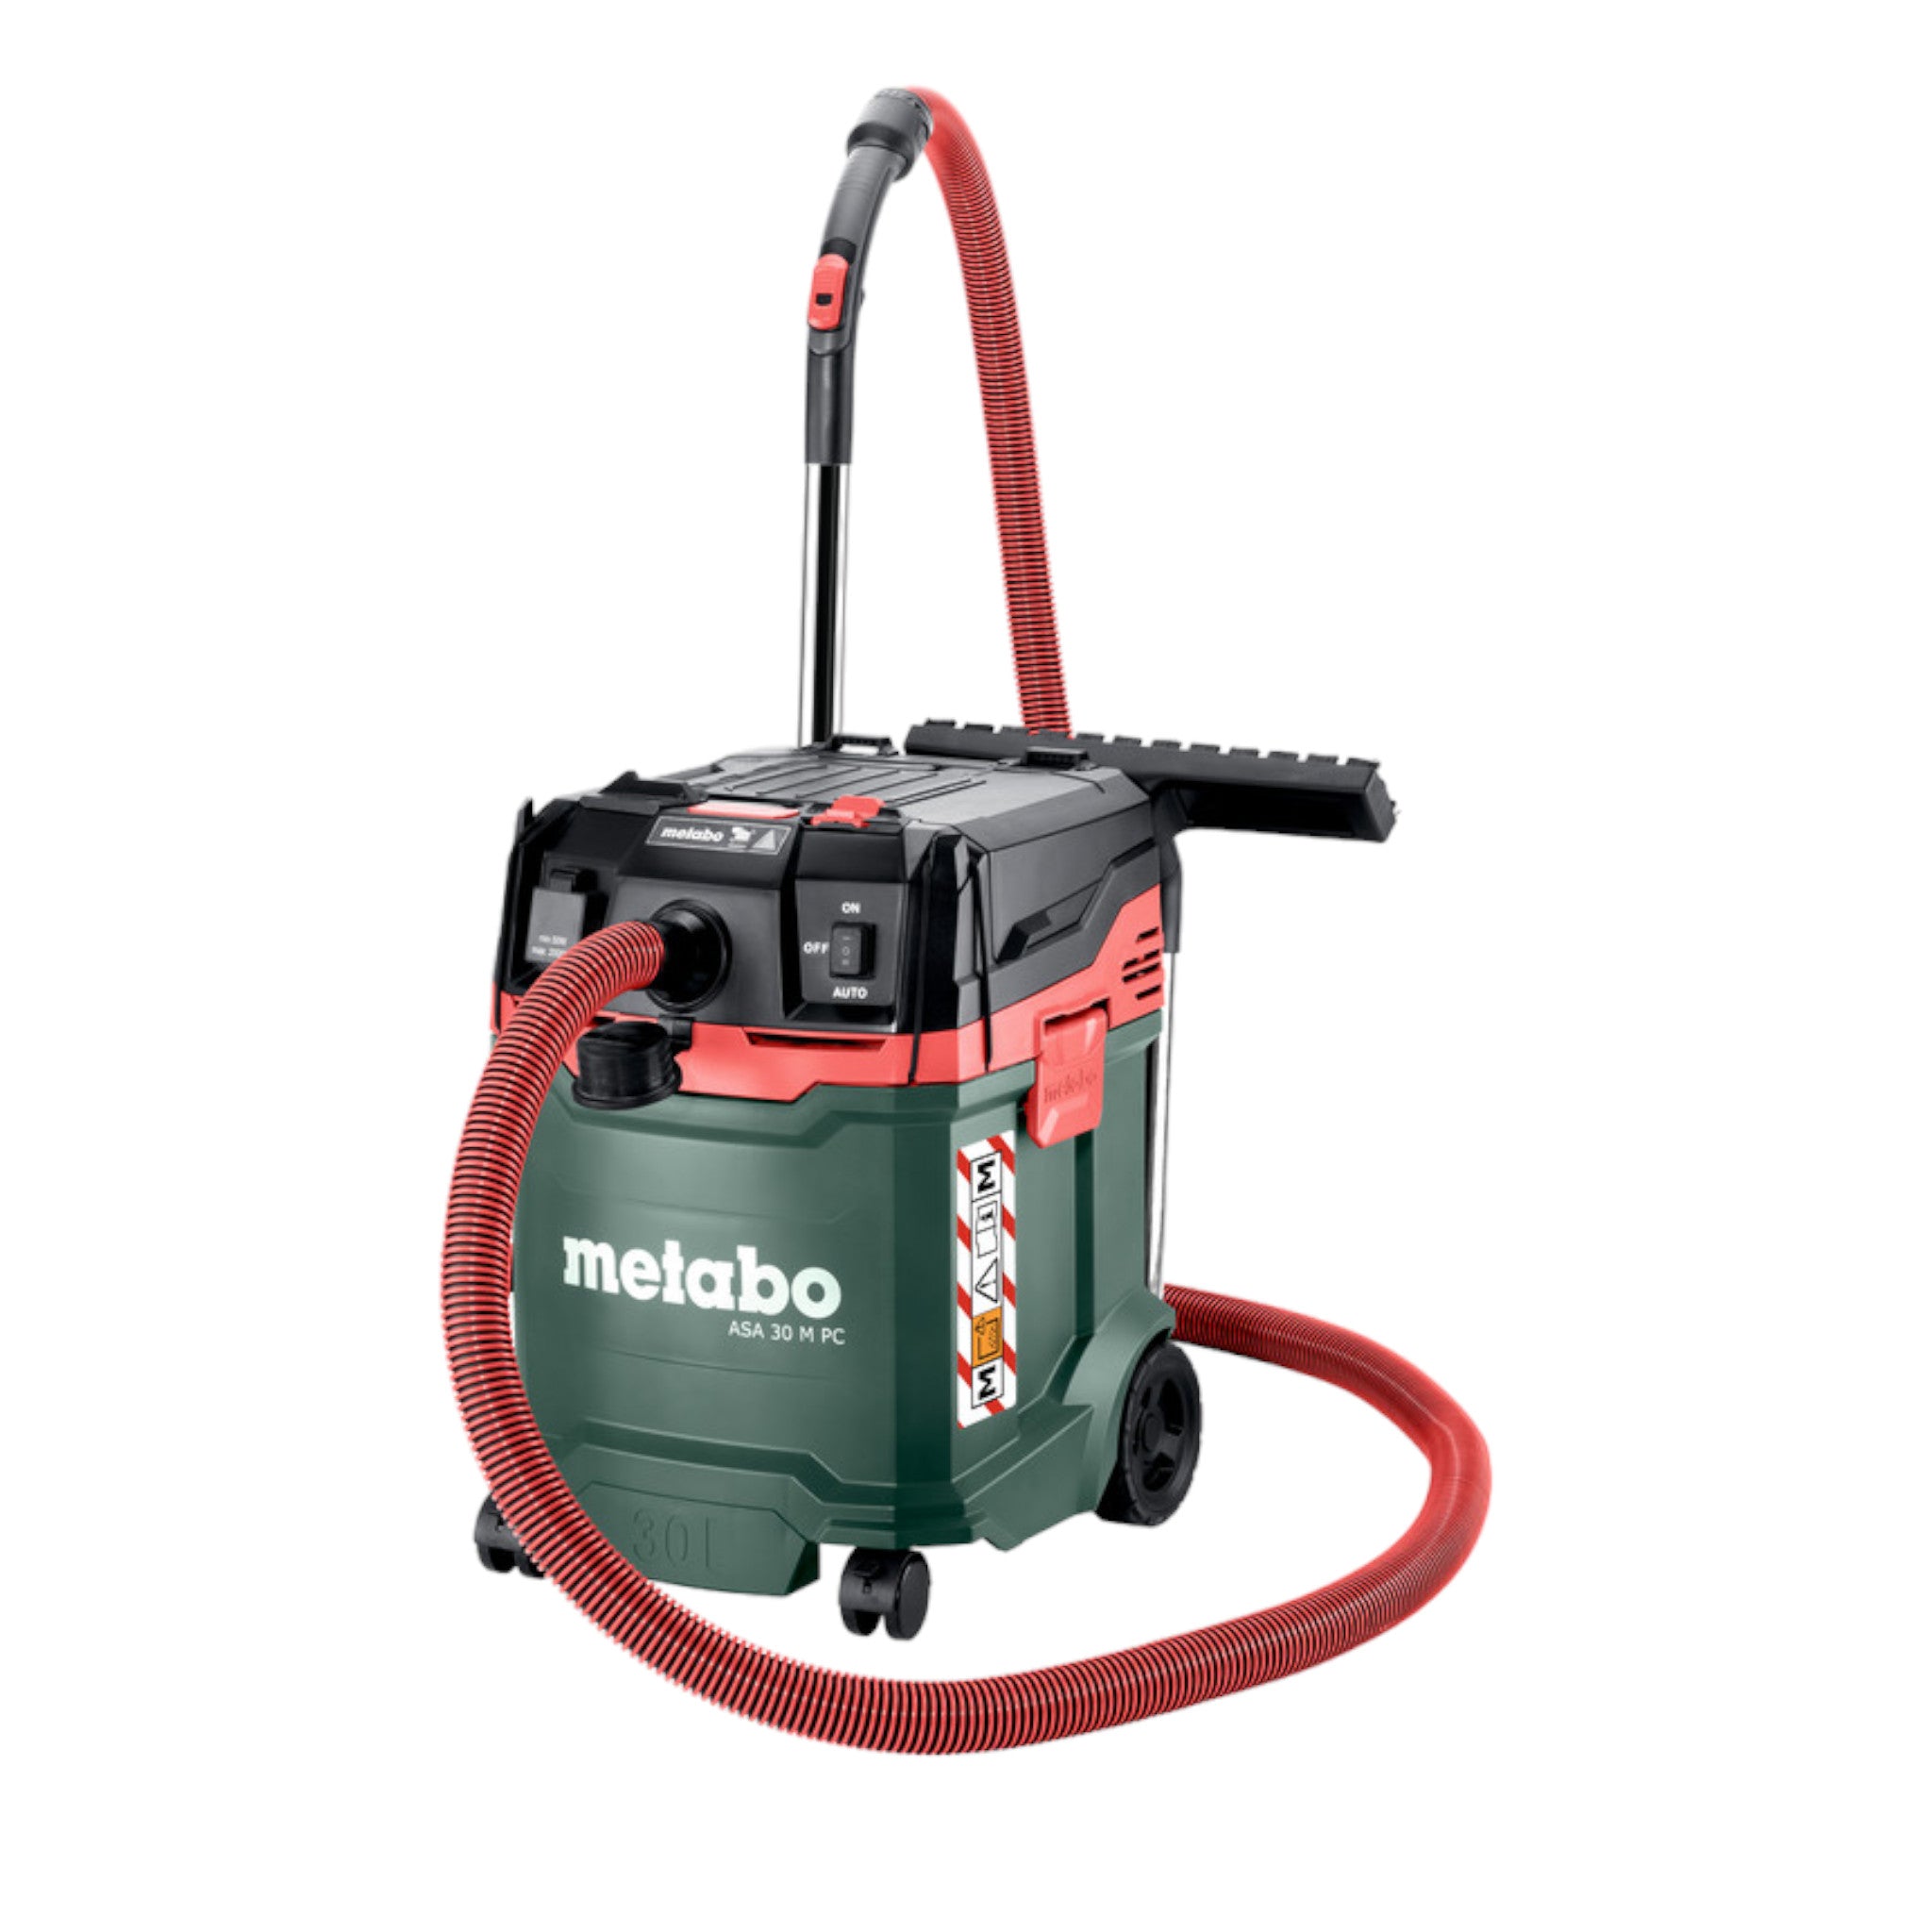 1200W 30L All Purpose Vacuum Cleaner ASA30MPC 602087190 by Metabo